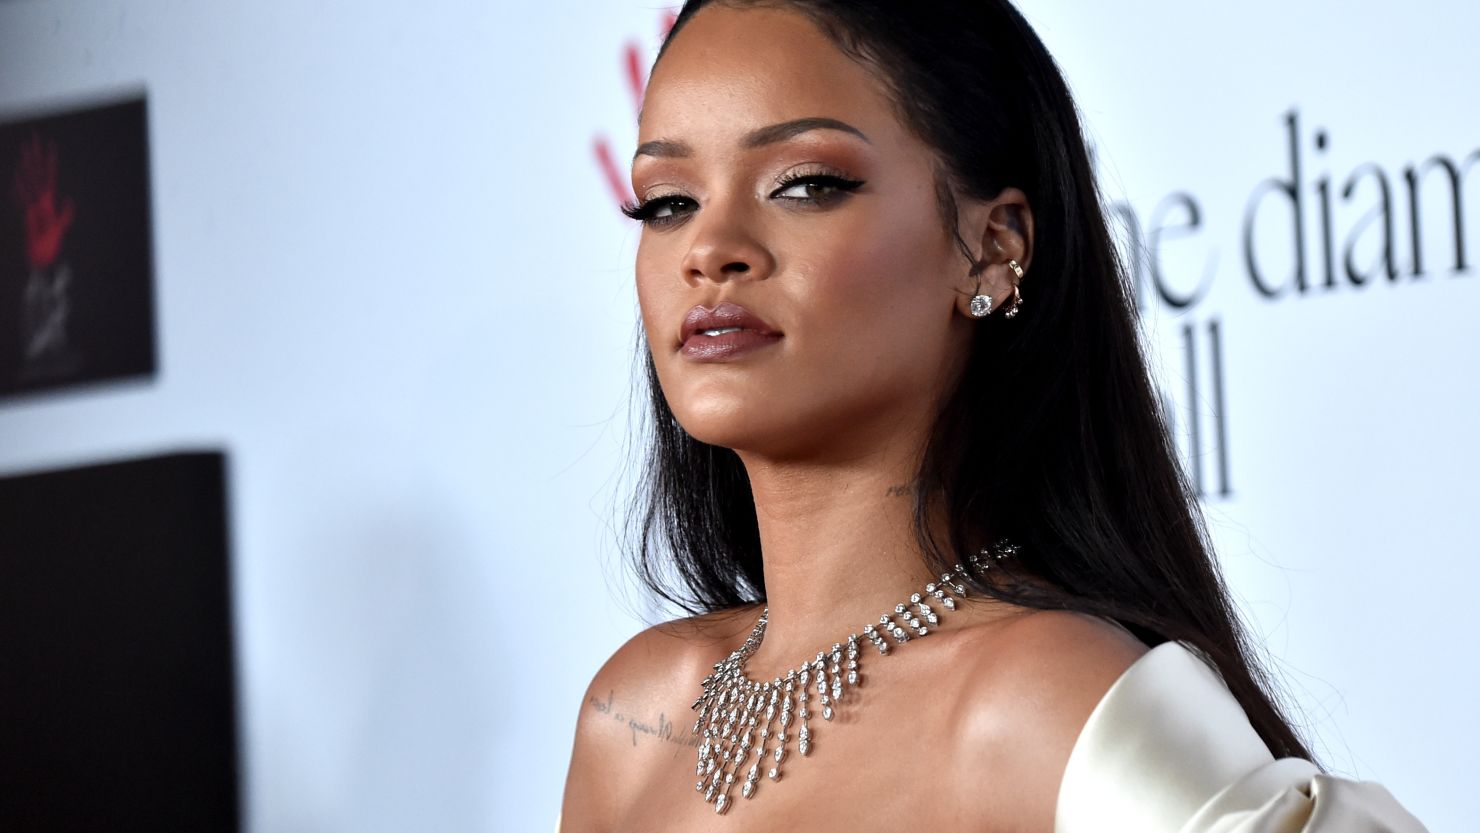 Rihanna will be showcasing her acting skills in a new TV role.